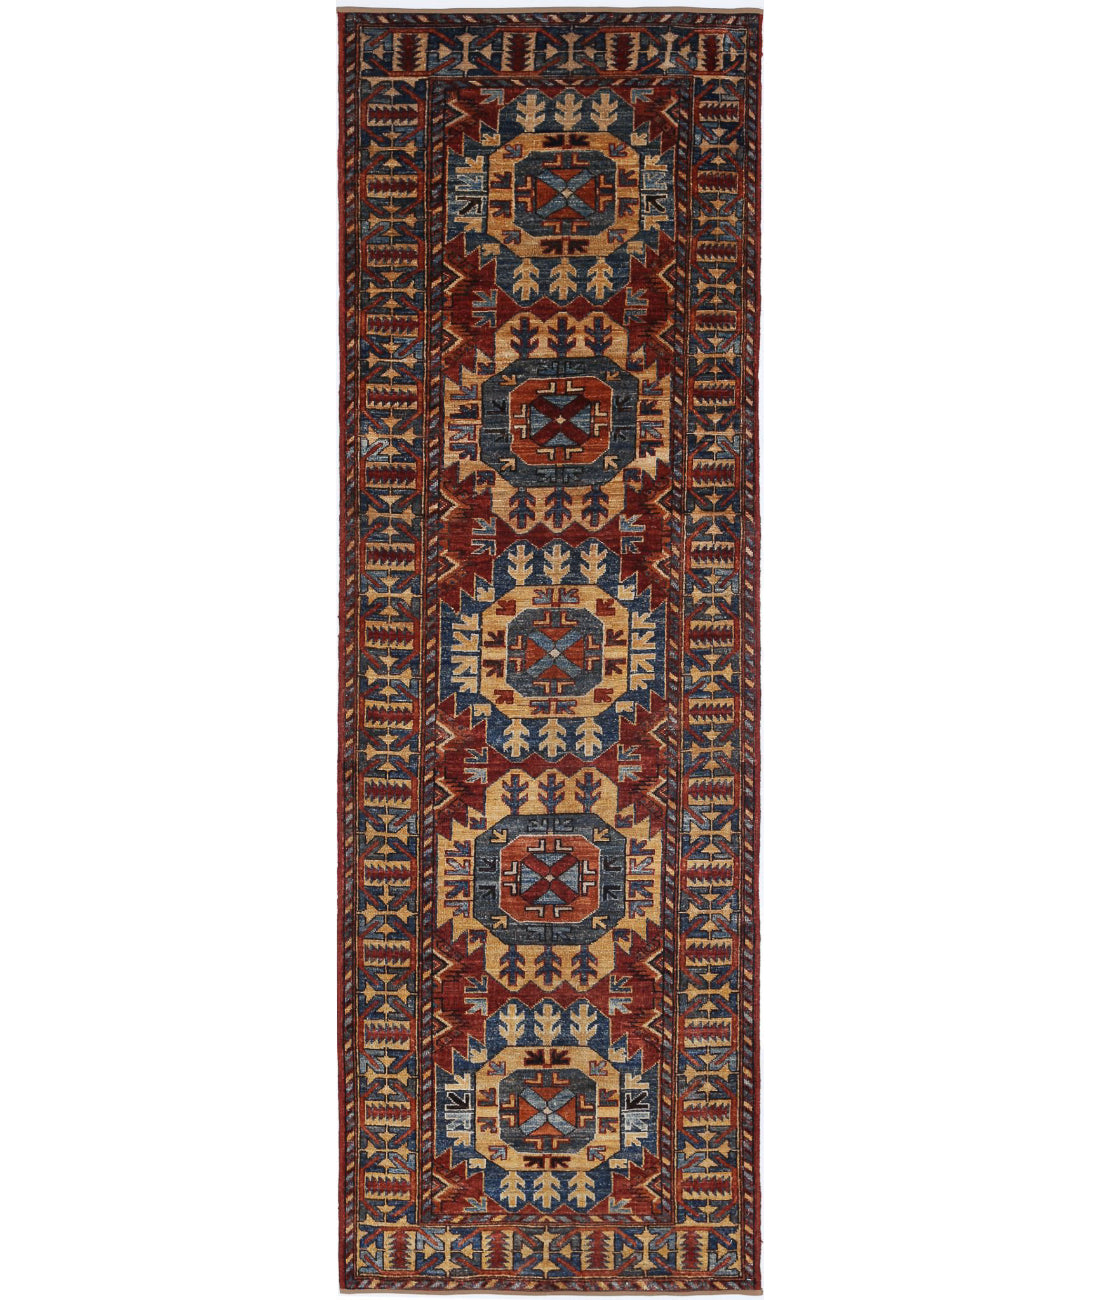 Hand Knotted Nomadic Caucasian Humna Wool Rug - 2'11'' x 9'10'' 2'11'' x 9'10'' (88 X 295) / Red / Multi